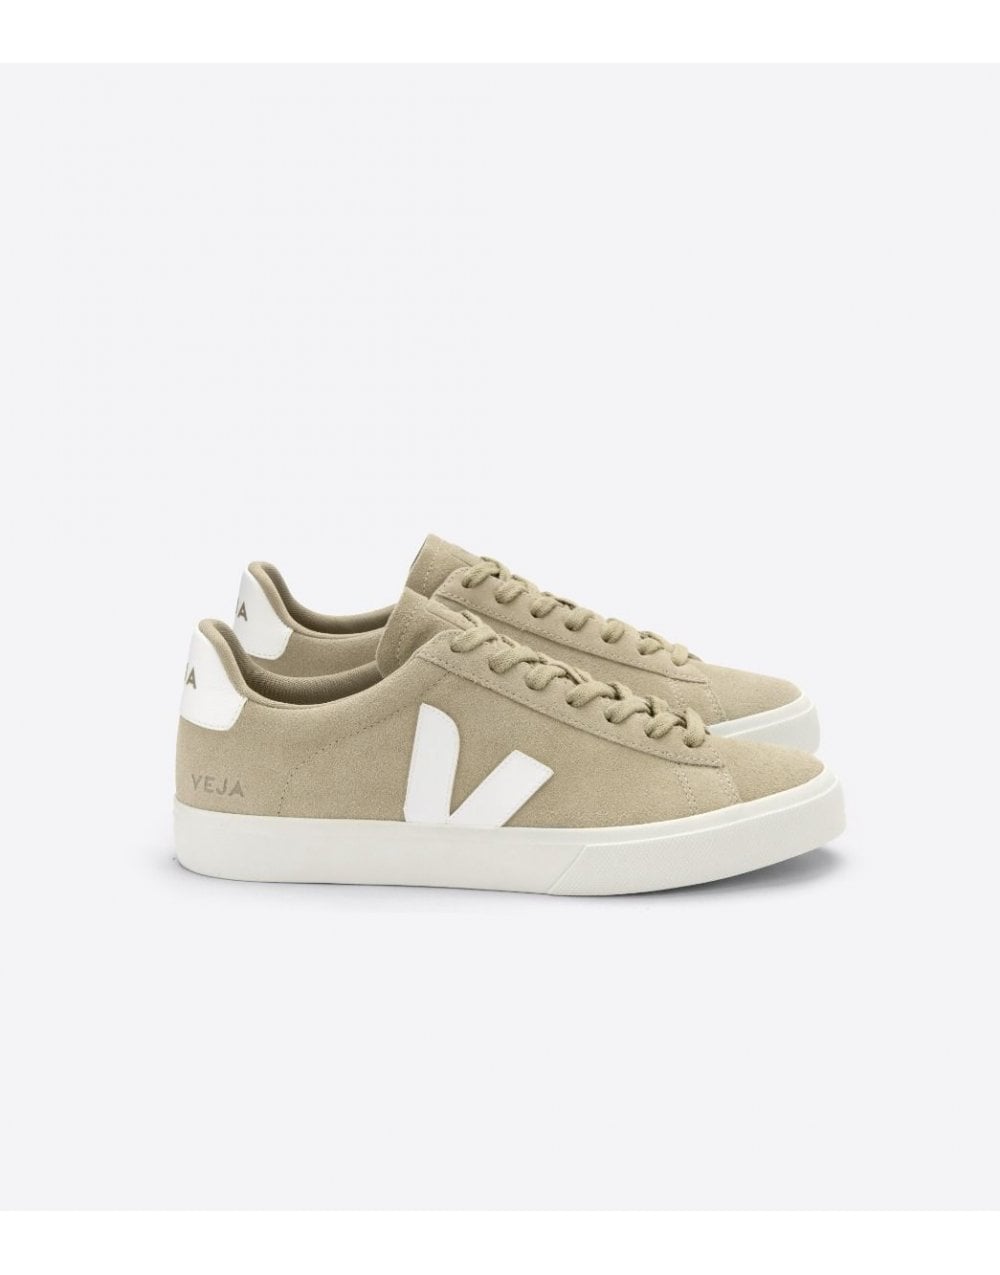 Veja Campo Suede Trainers Col: Dune/ White, Size: 5